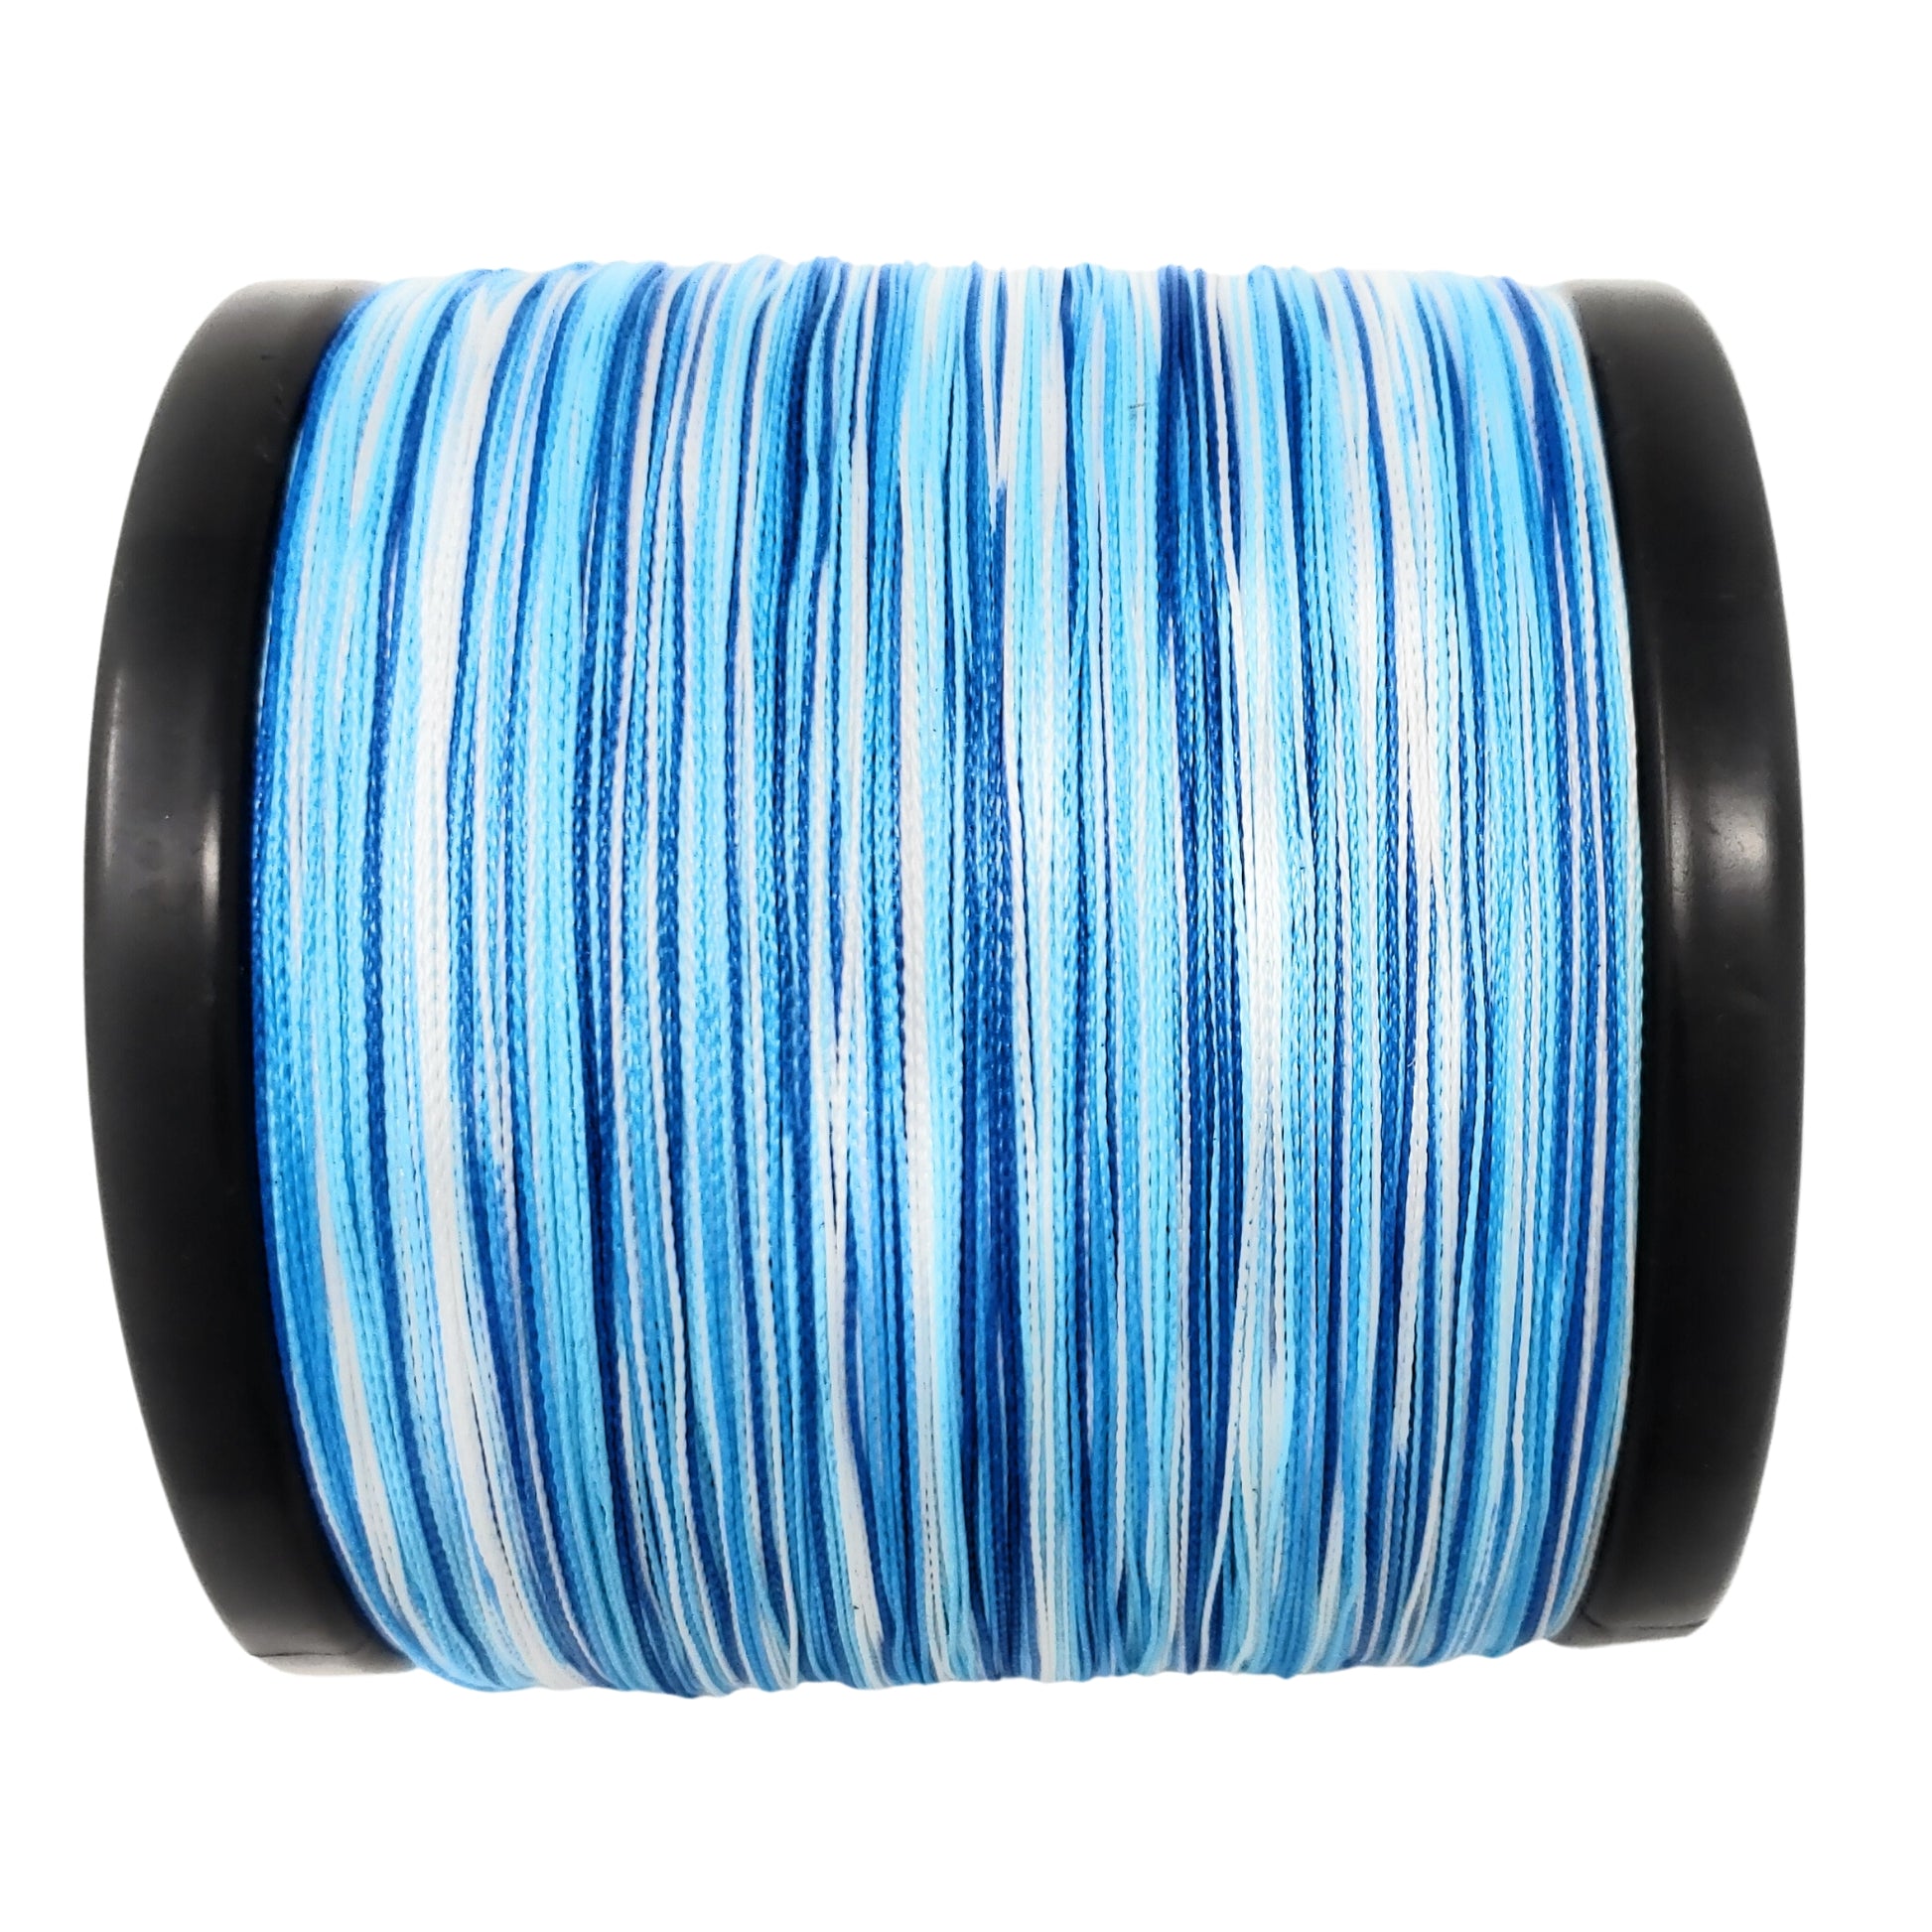 Reaction Tackle Braided Fishing Line Blue camo 15LB 500yd